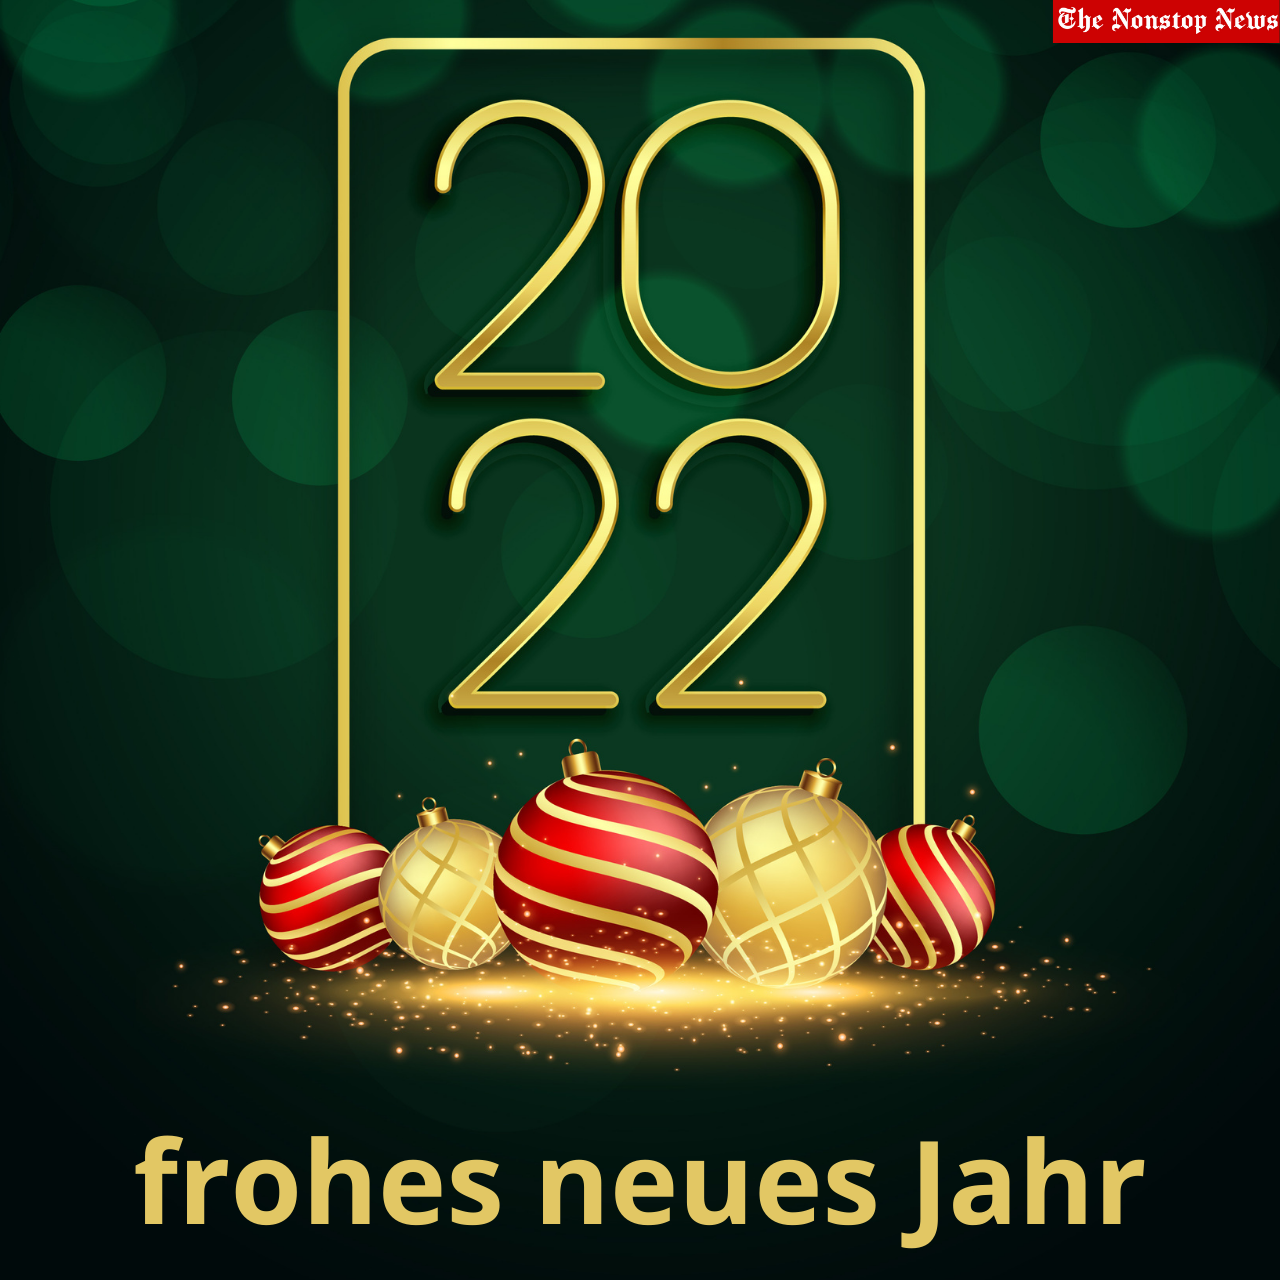 New Year 2022: German Quotes, Messages, Greetings, HD Images, Posters, Sayings, Cliparts to Share